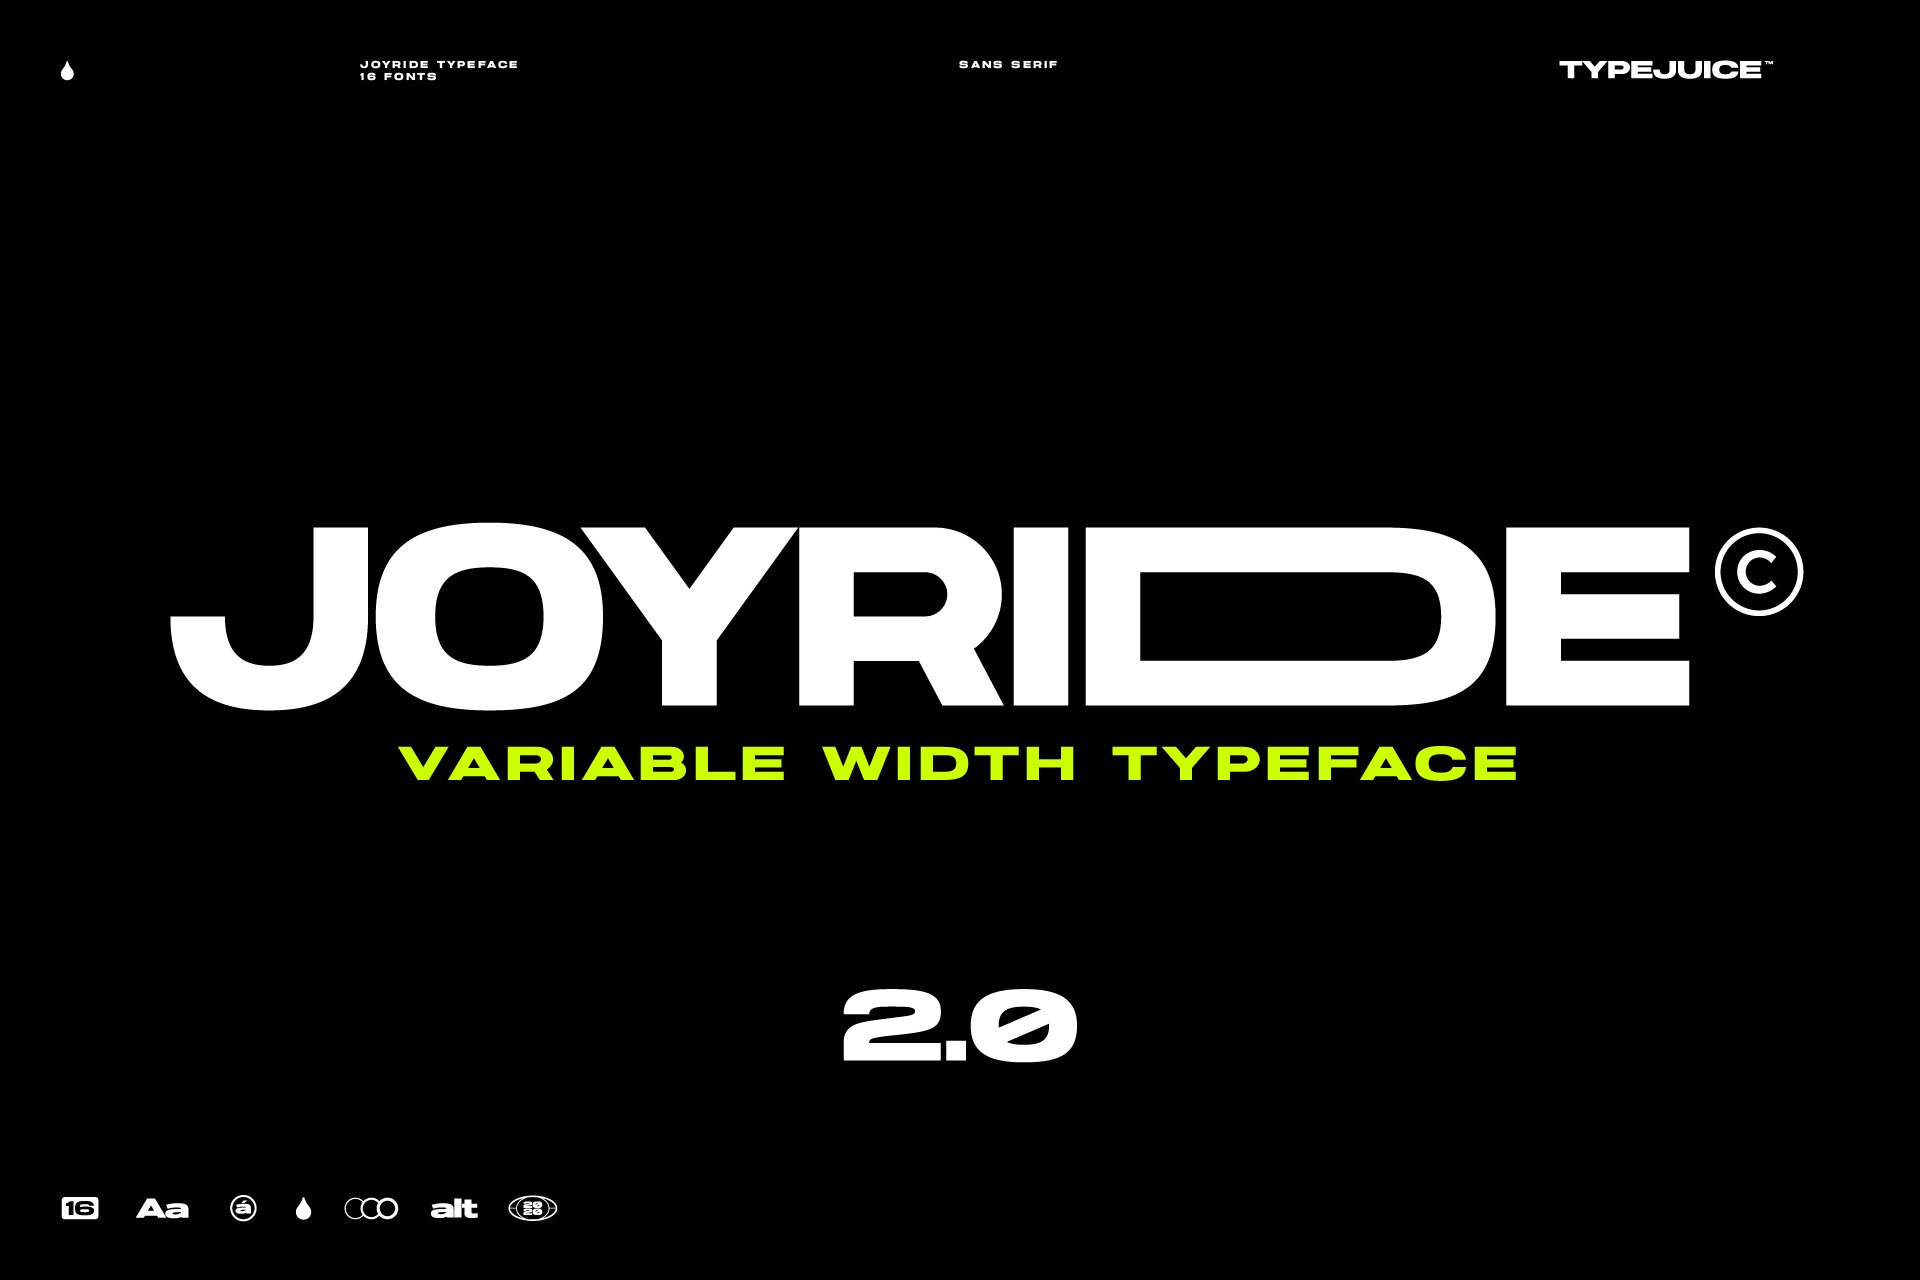 Joyride Extended Typeface cover image.